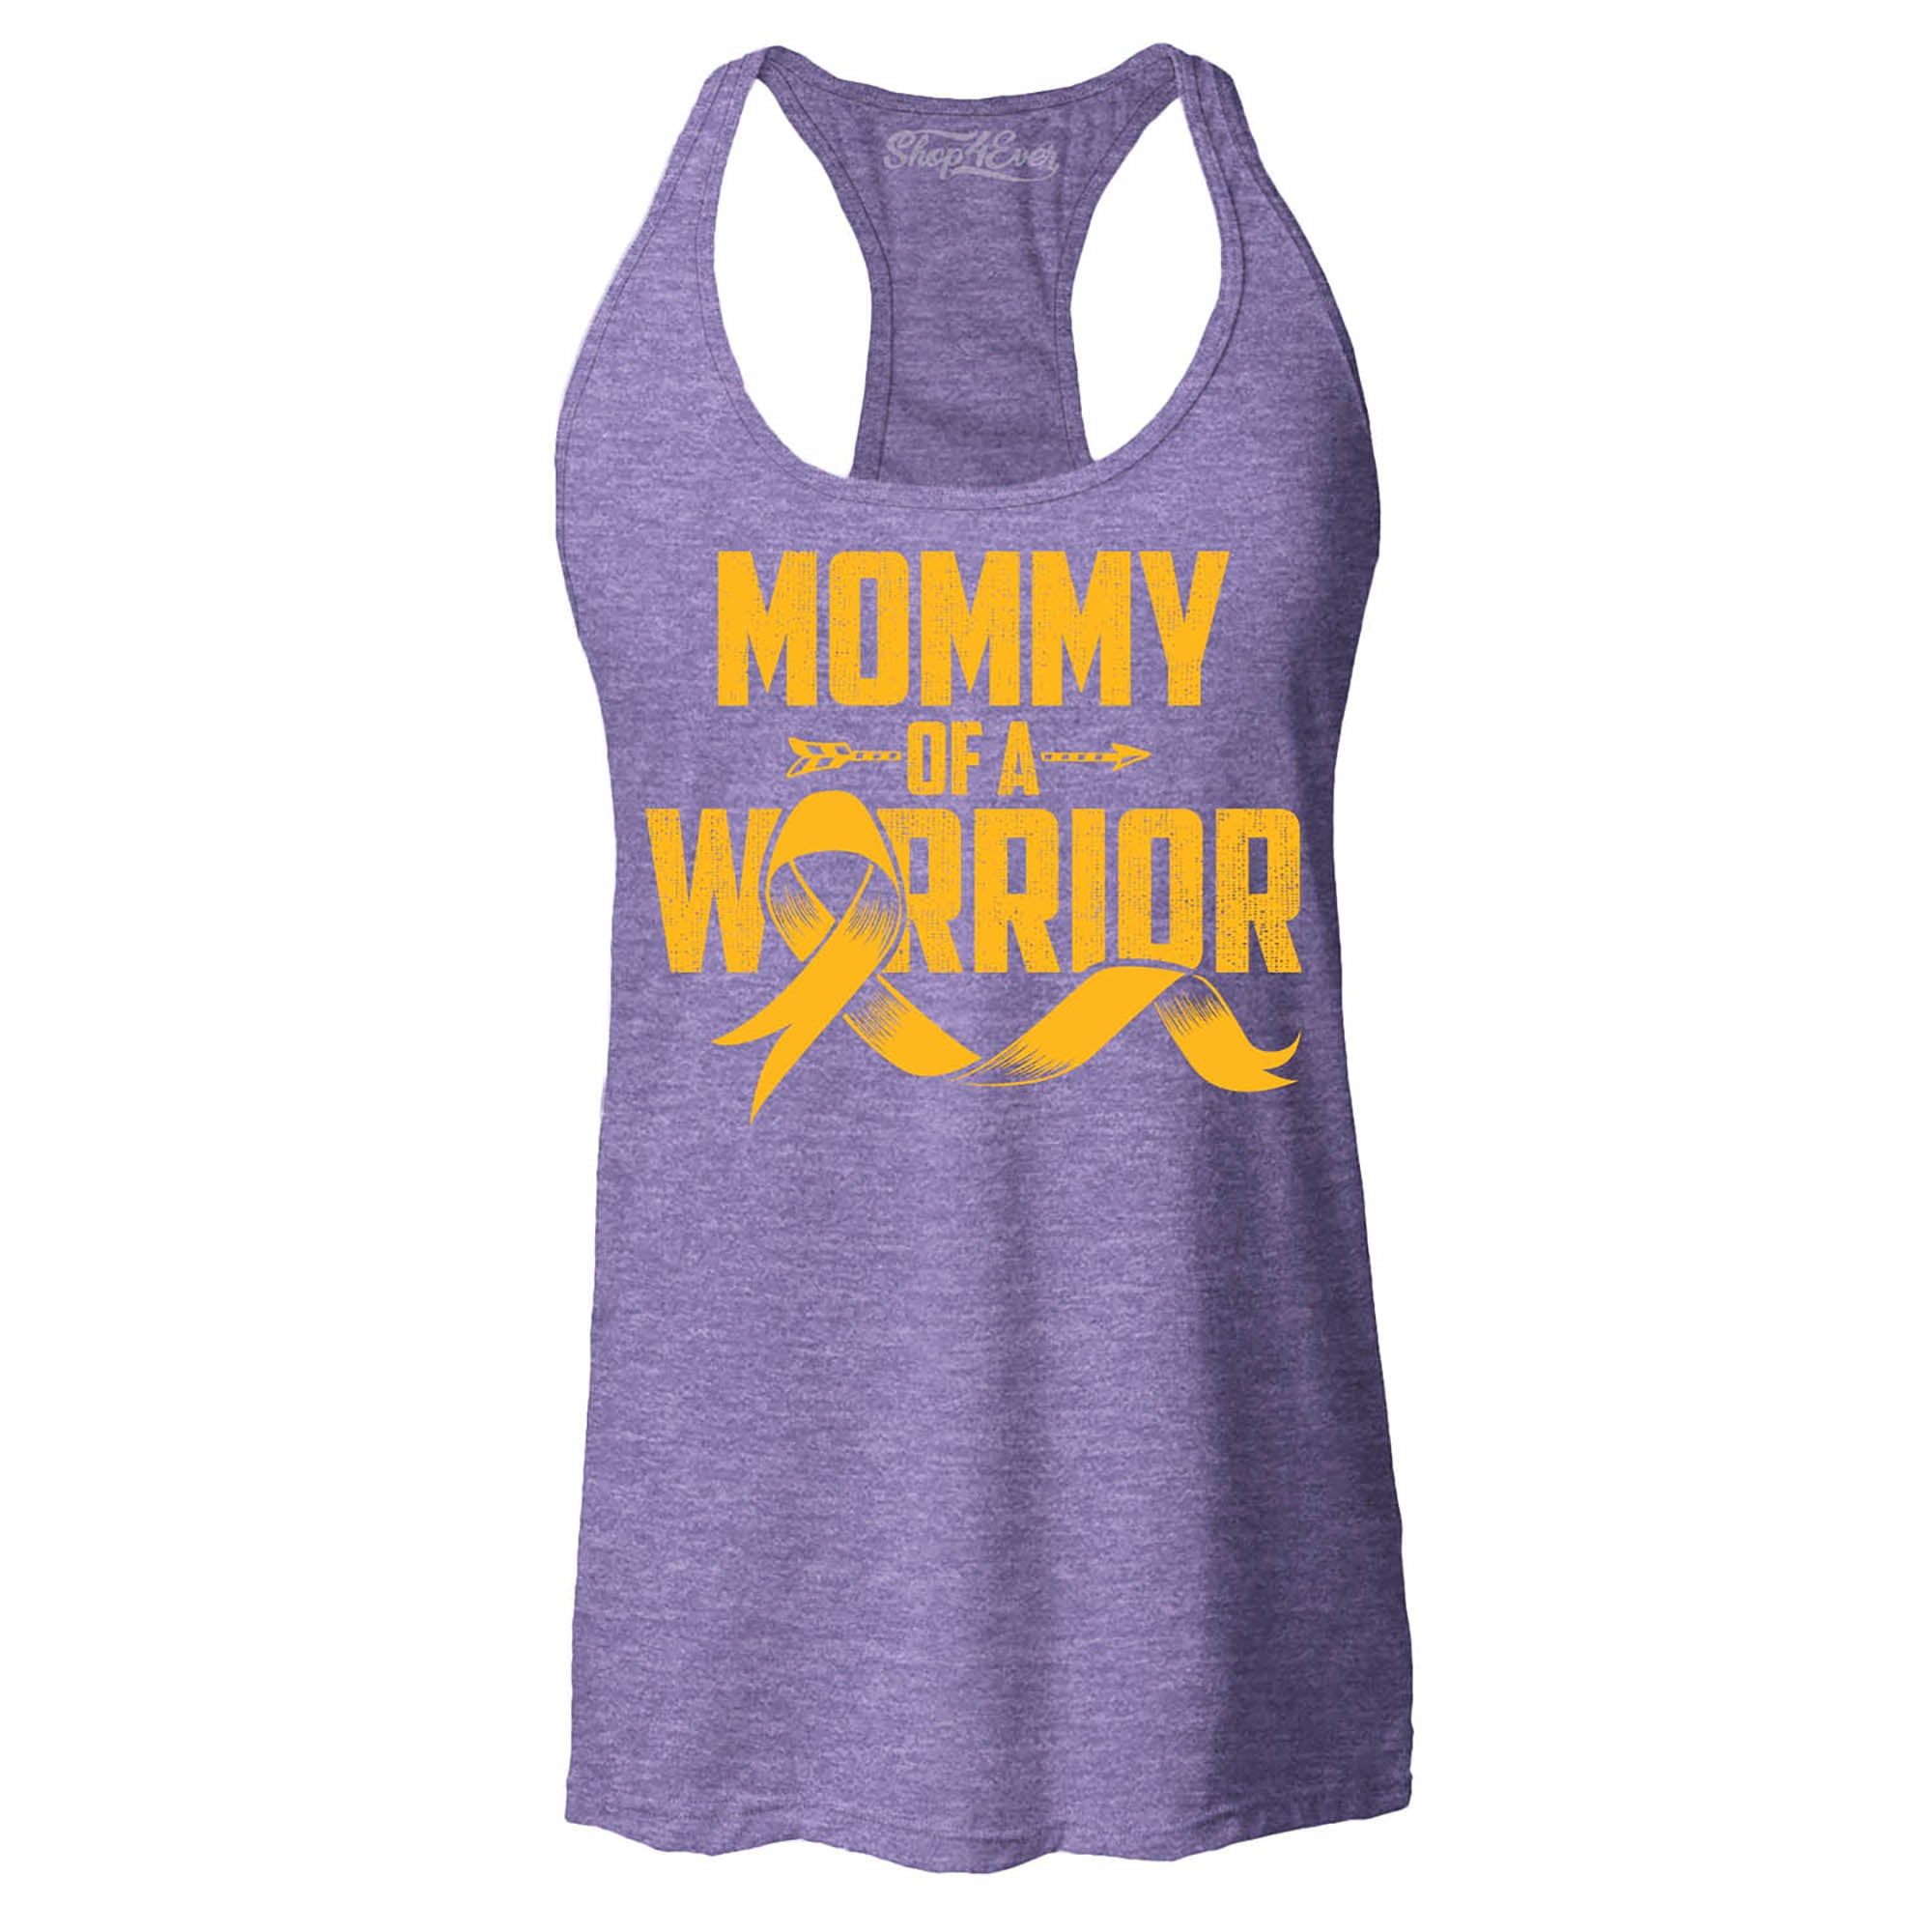 Mommy of a Warrior Childhood Cancer Awareness Women's Racerback Tank Top Slim Fit